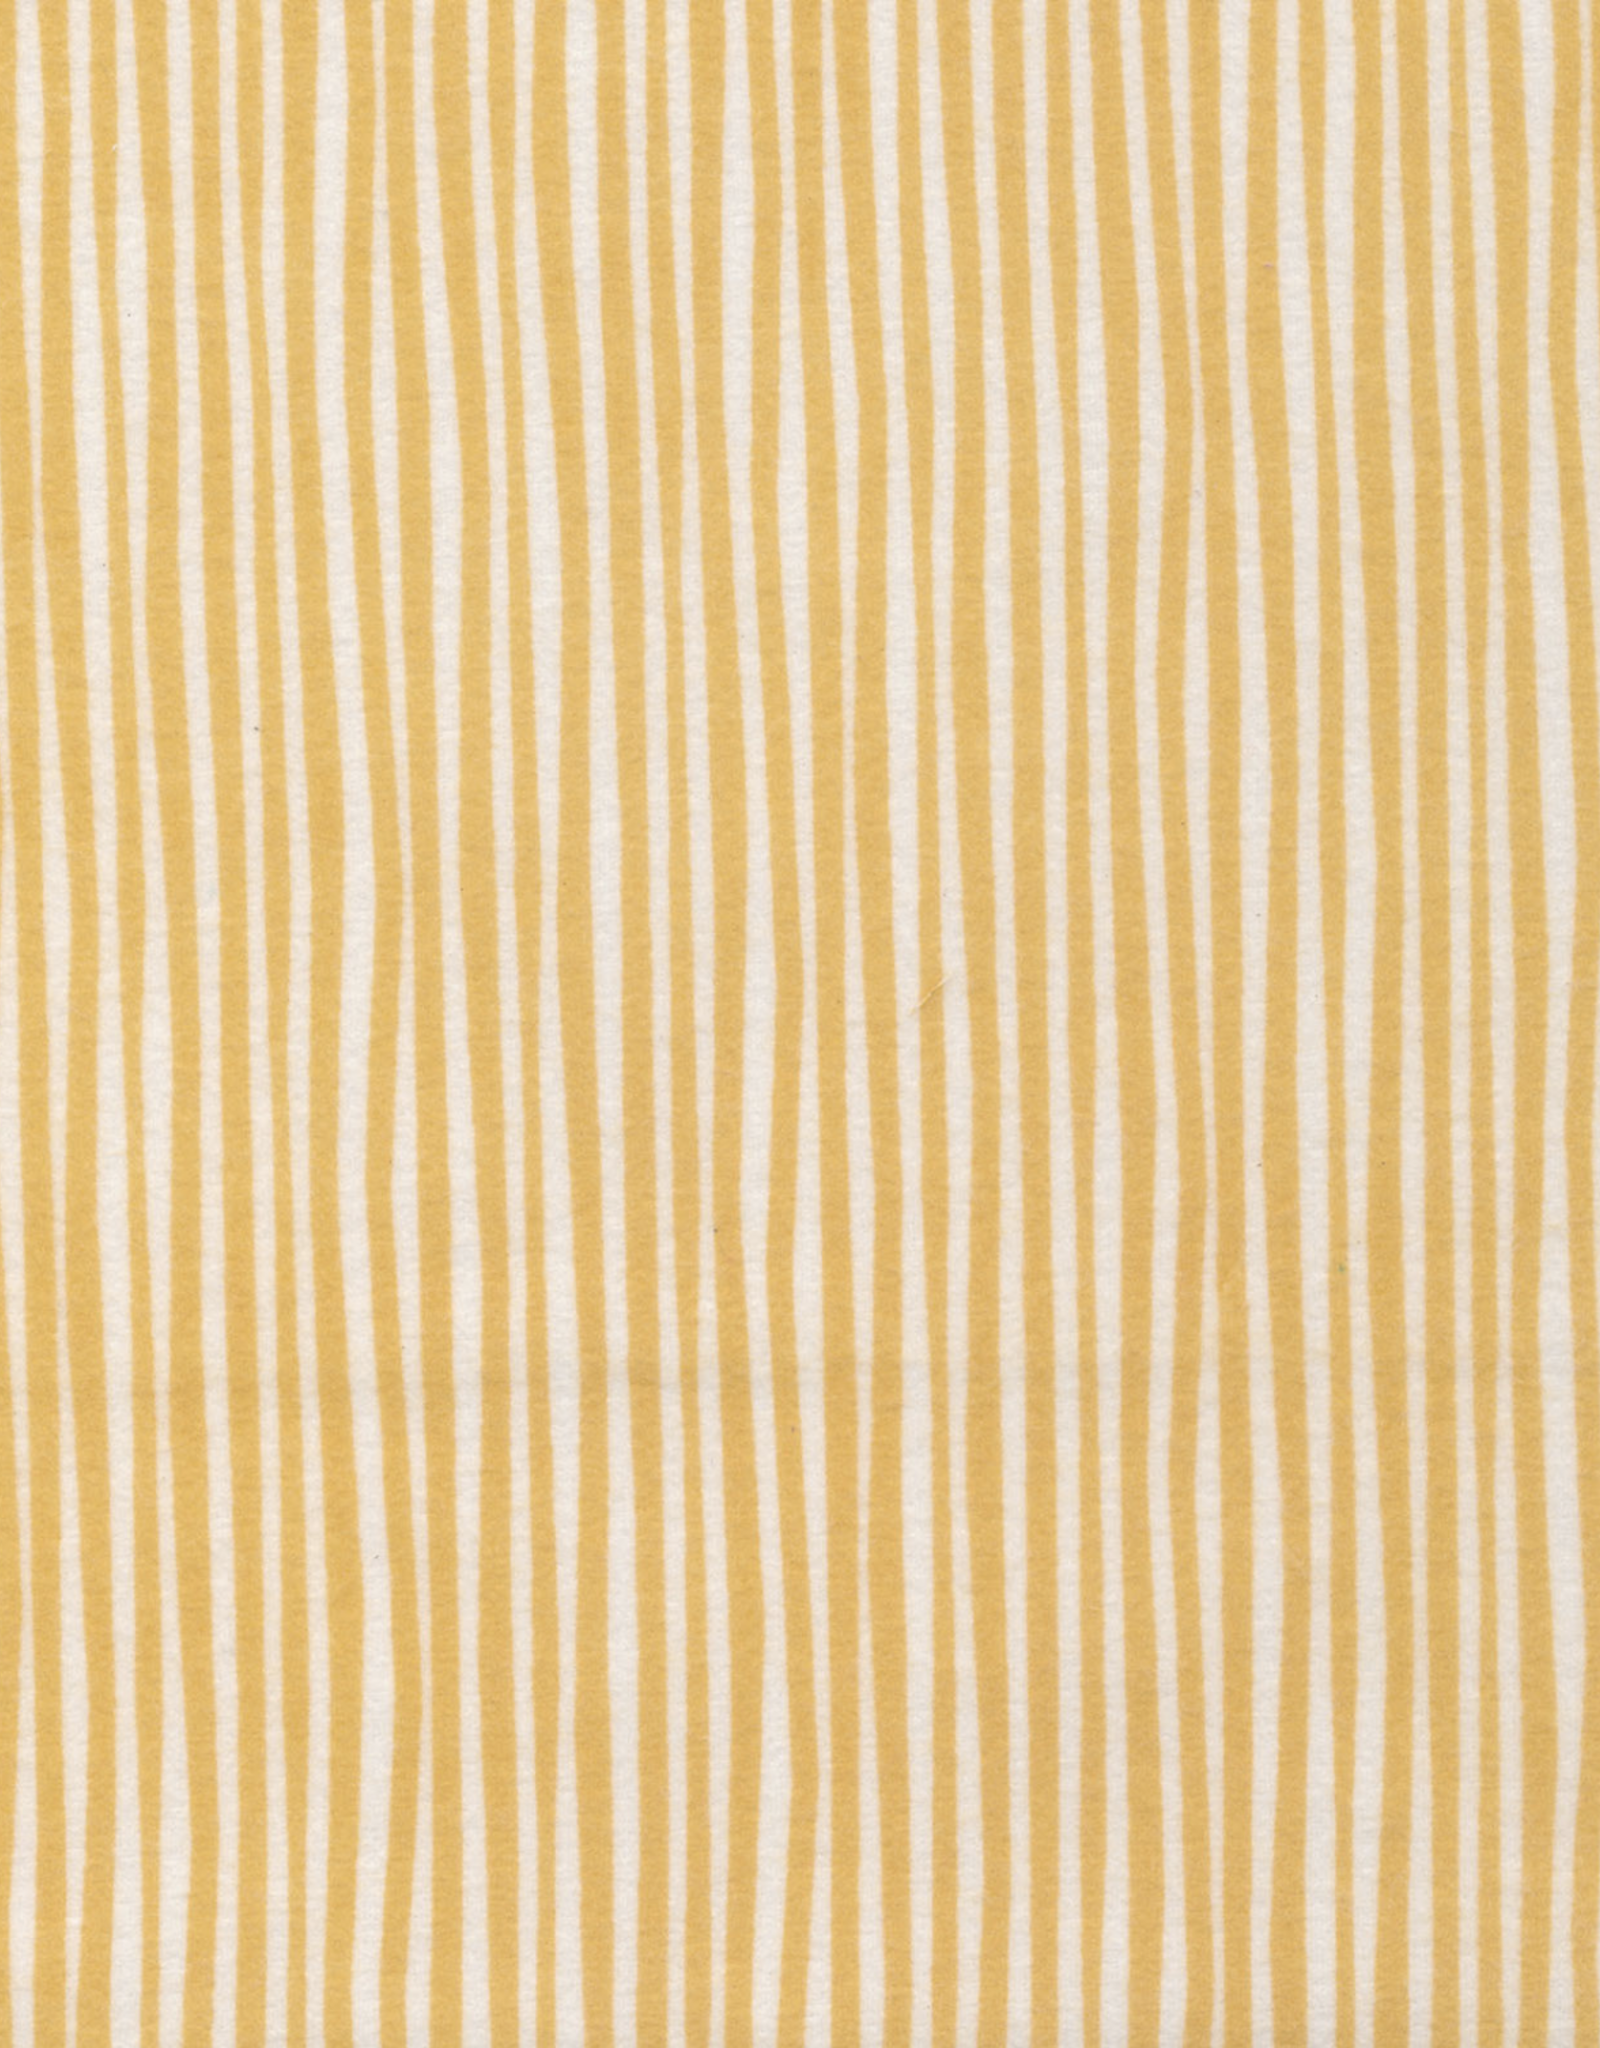 Cloud 9 Fabric Northerly Flannel by Lindsay Bonaccorso Straws Gold